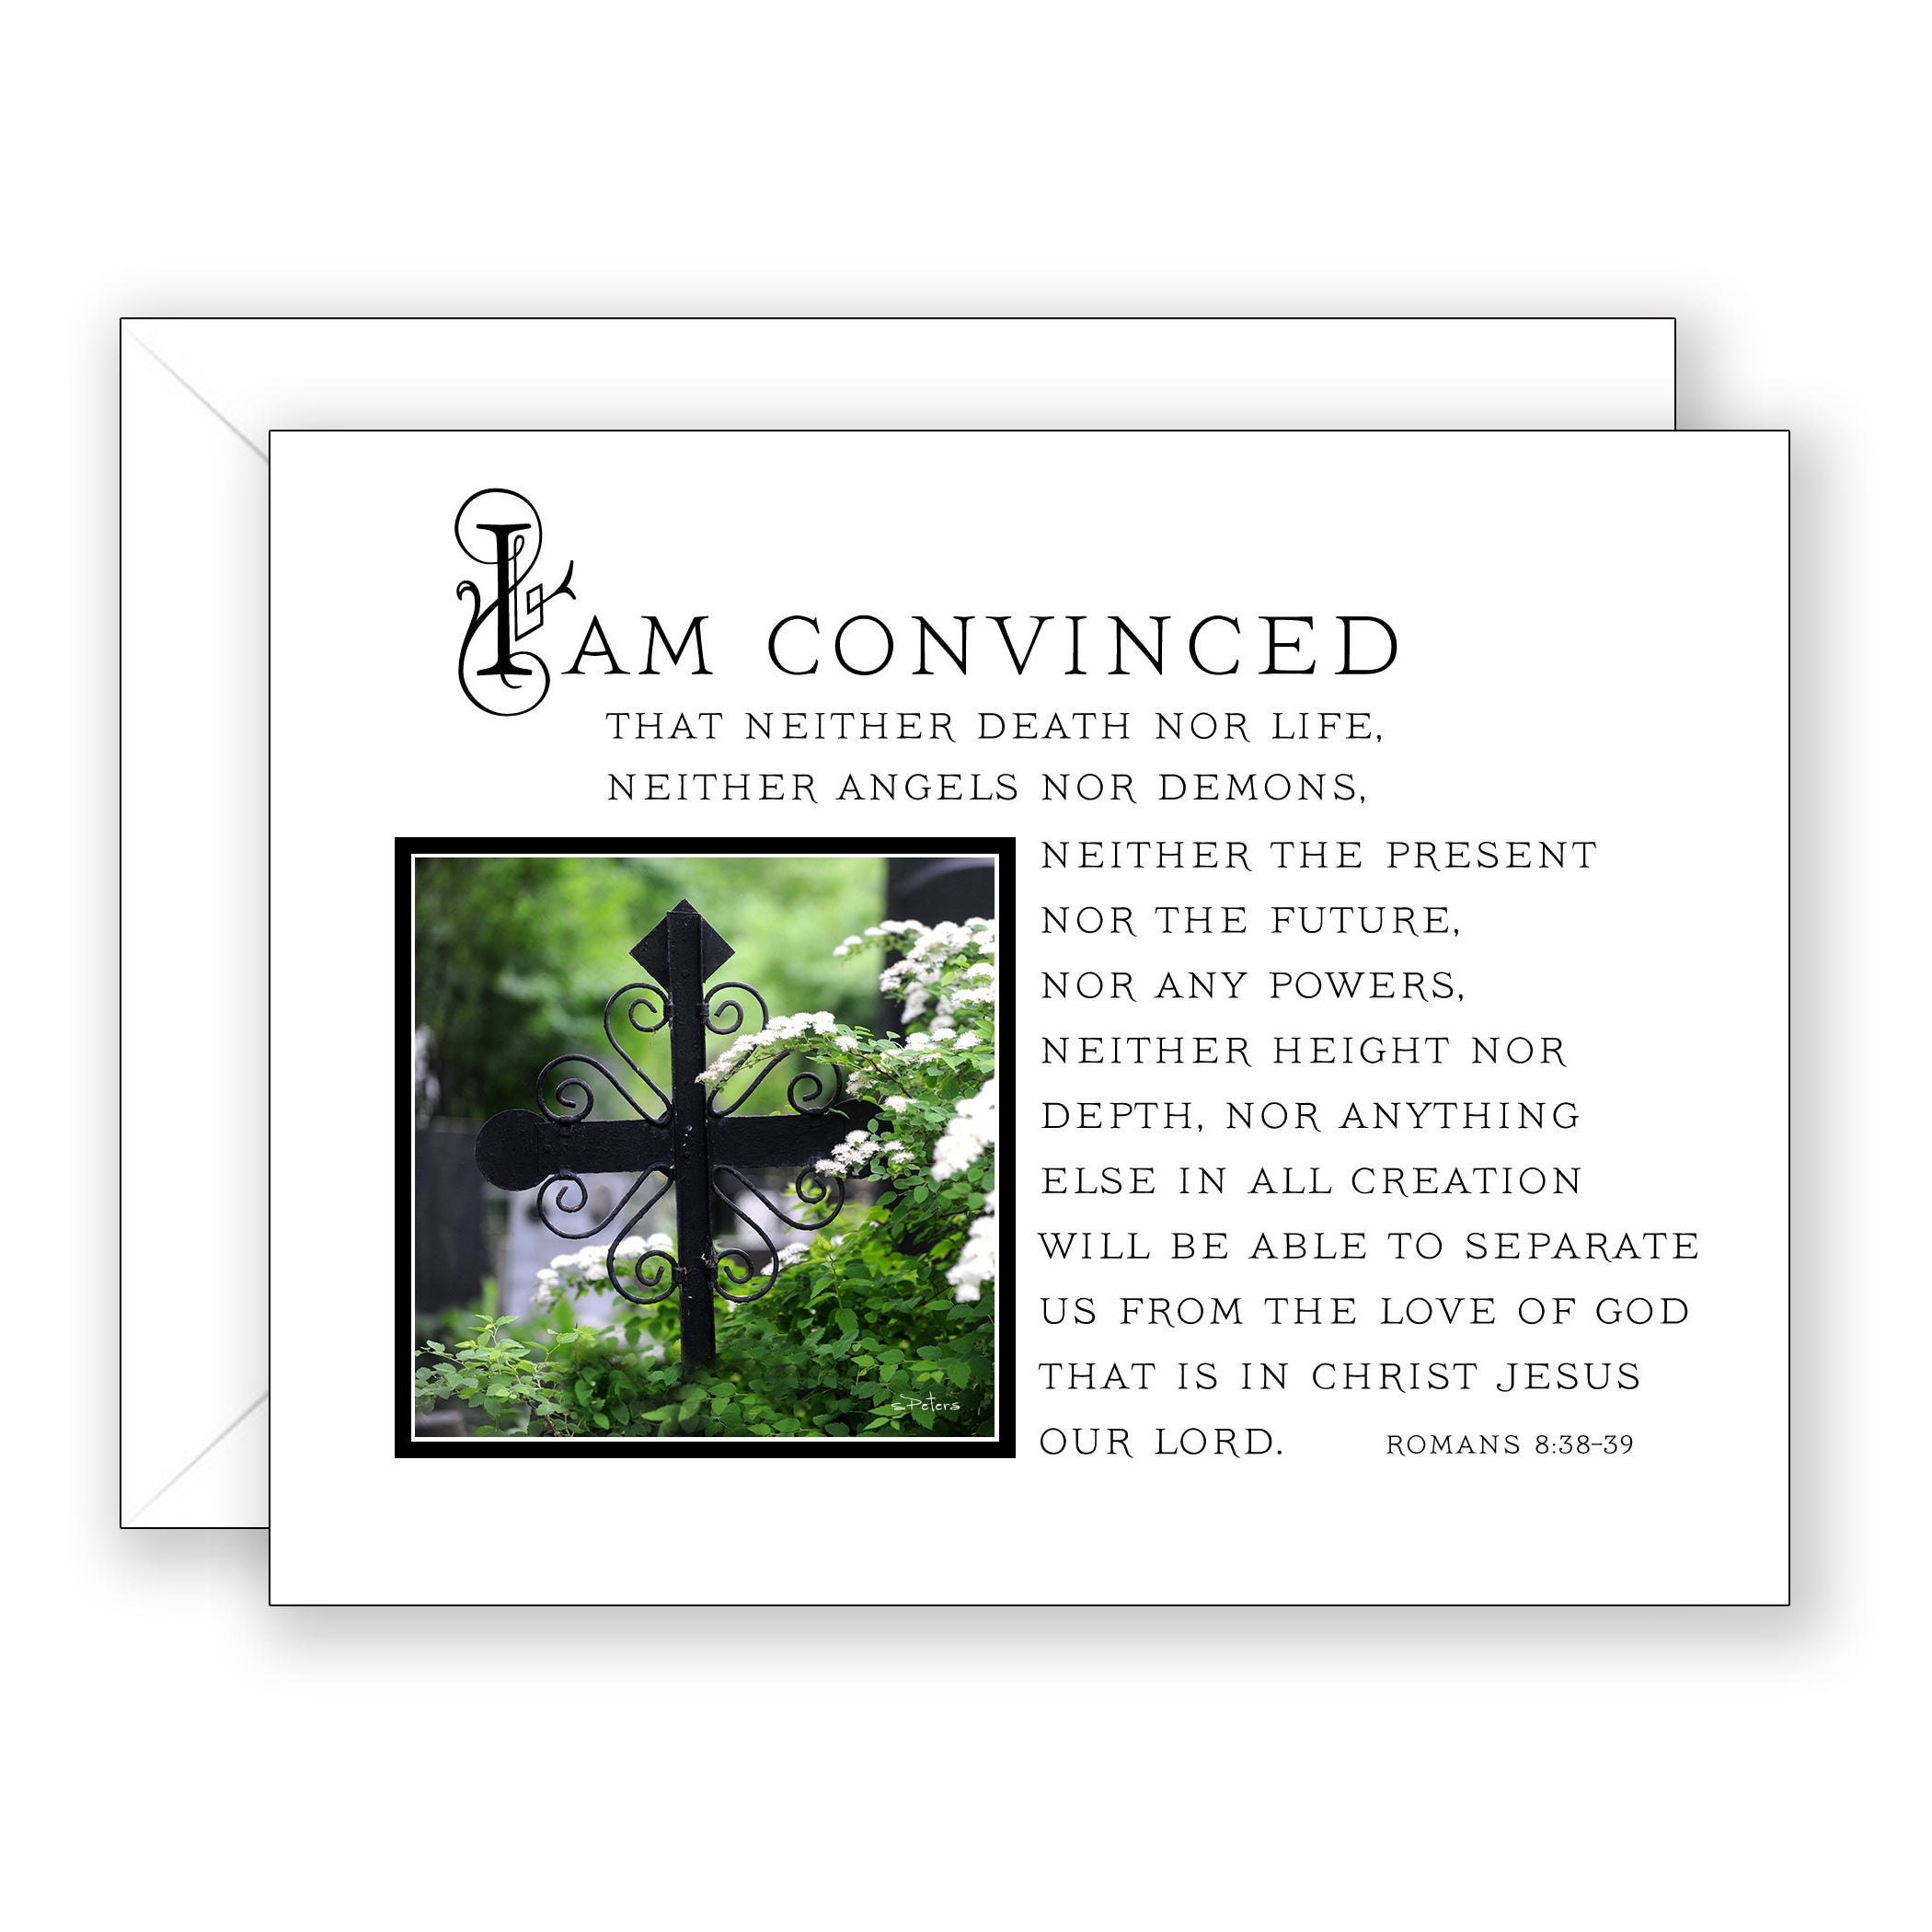 Iron Cross in the Garden (Romans 8:38-39) - Thinking of You Card